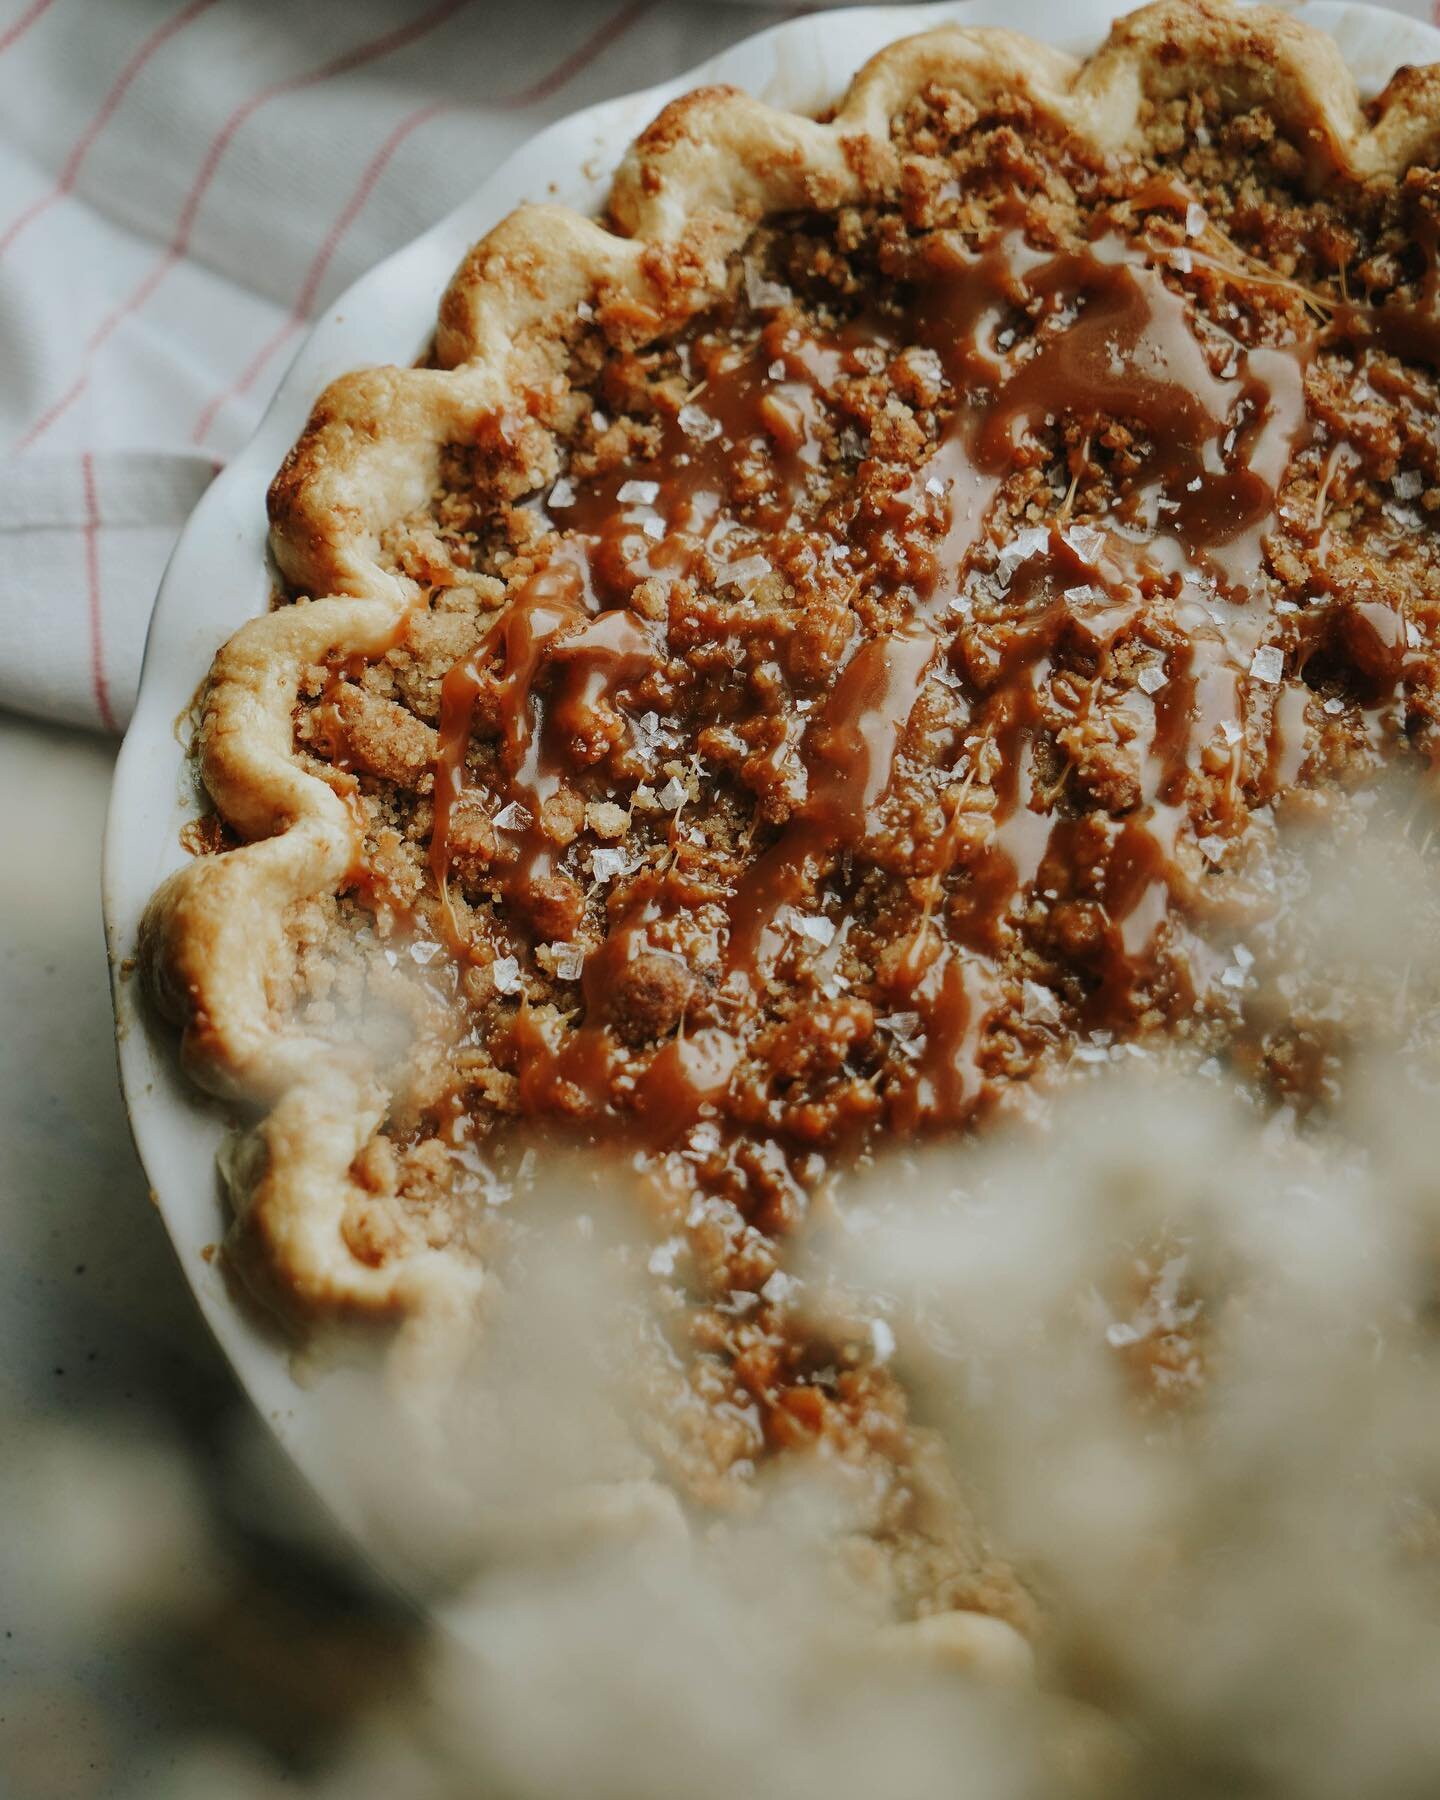 Today is the last day to order pie! Link is in bio to preorder. 

This salted caramel apple pie is from a styled shoot I got to be a part of last week. The photos are so dreamy! Luckily for you, this pie is available for pre-order for Thanksgiving. 
